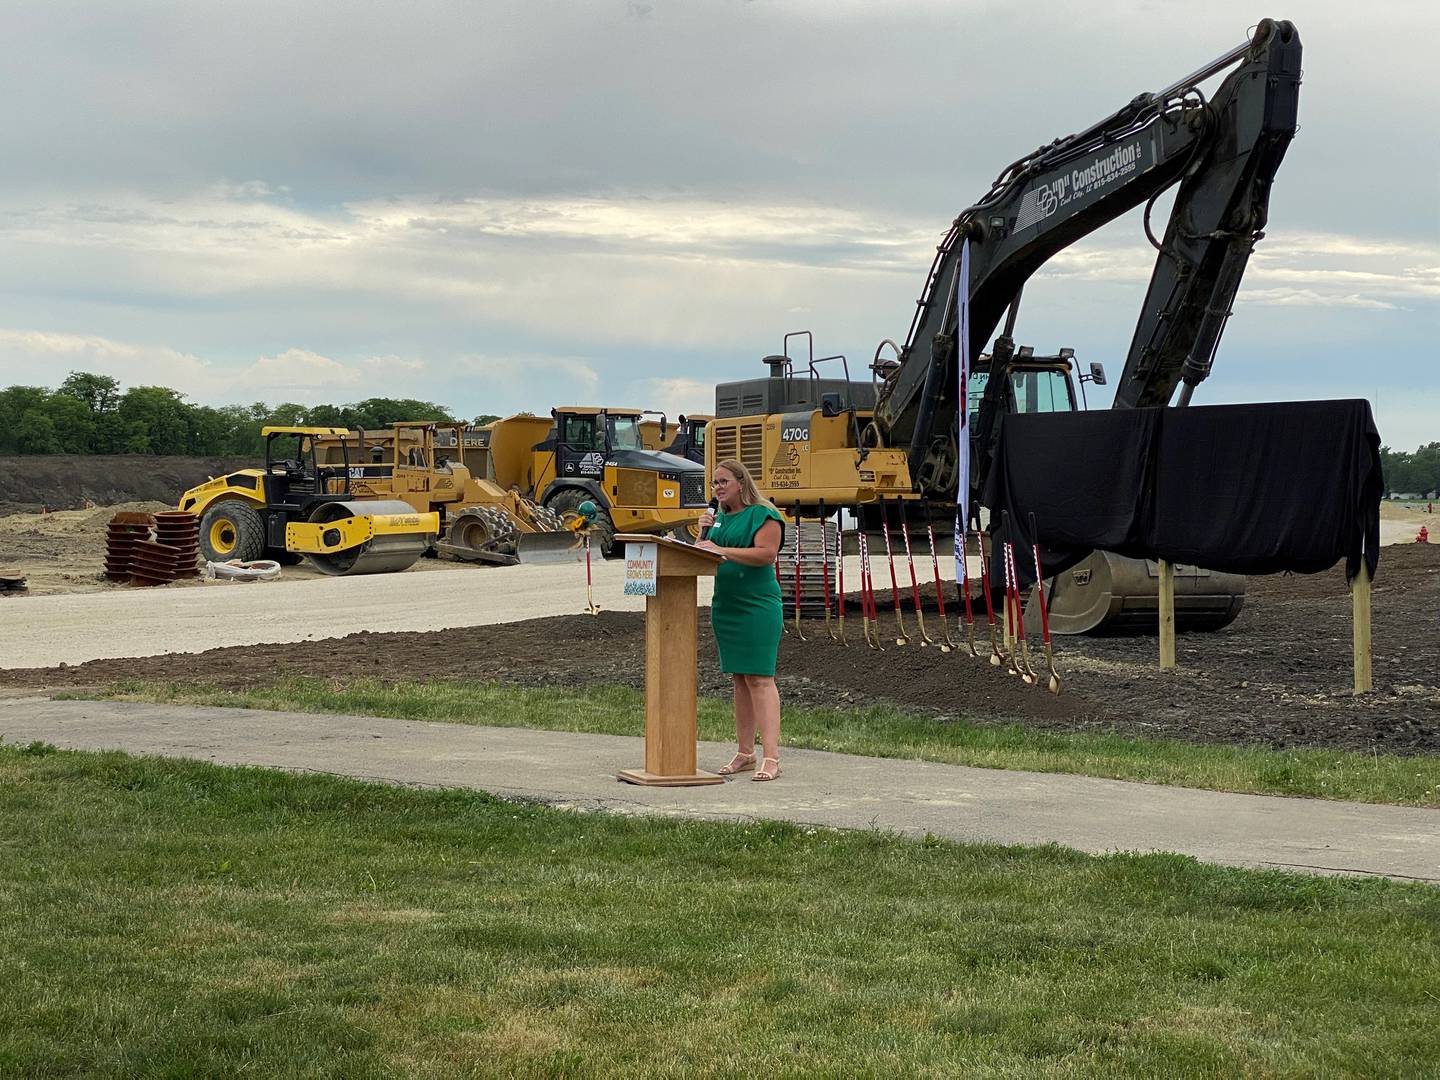 Greater Joliet Area YMCA President Katy Leclair addresses a crowd in front of bulldozers at the groundbreaking for the new Morris Hospital YMCA.